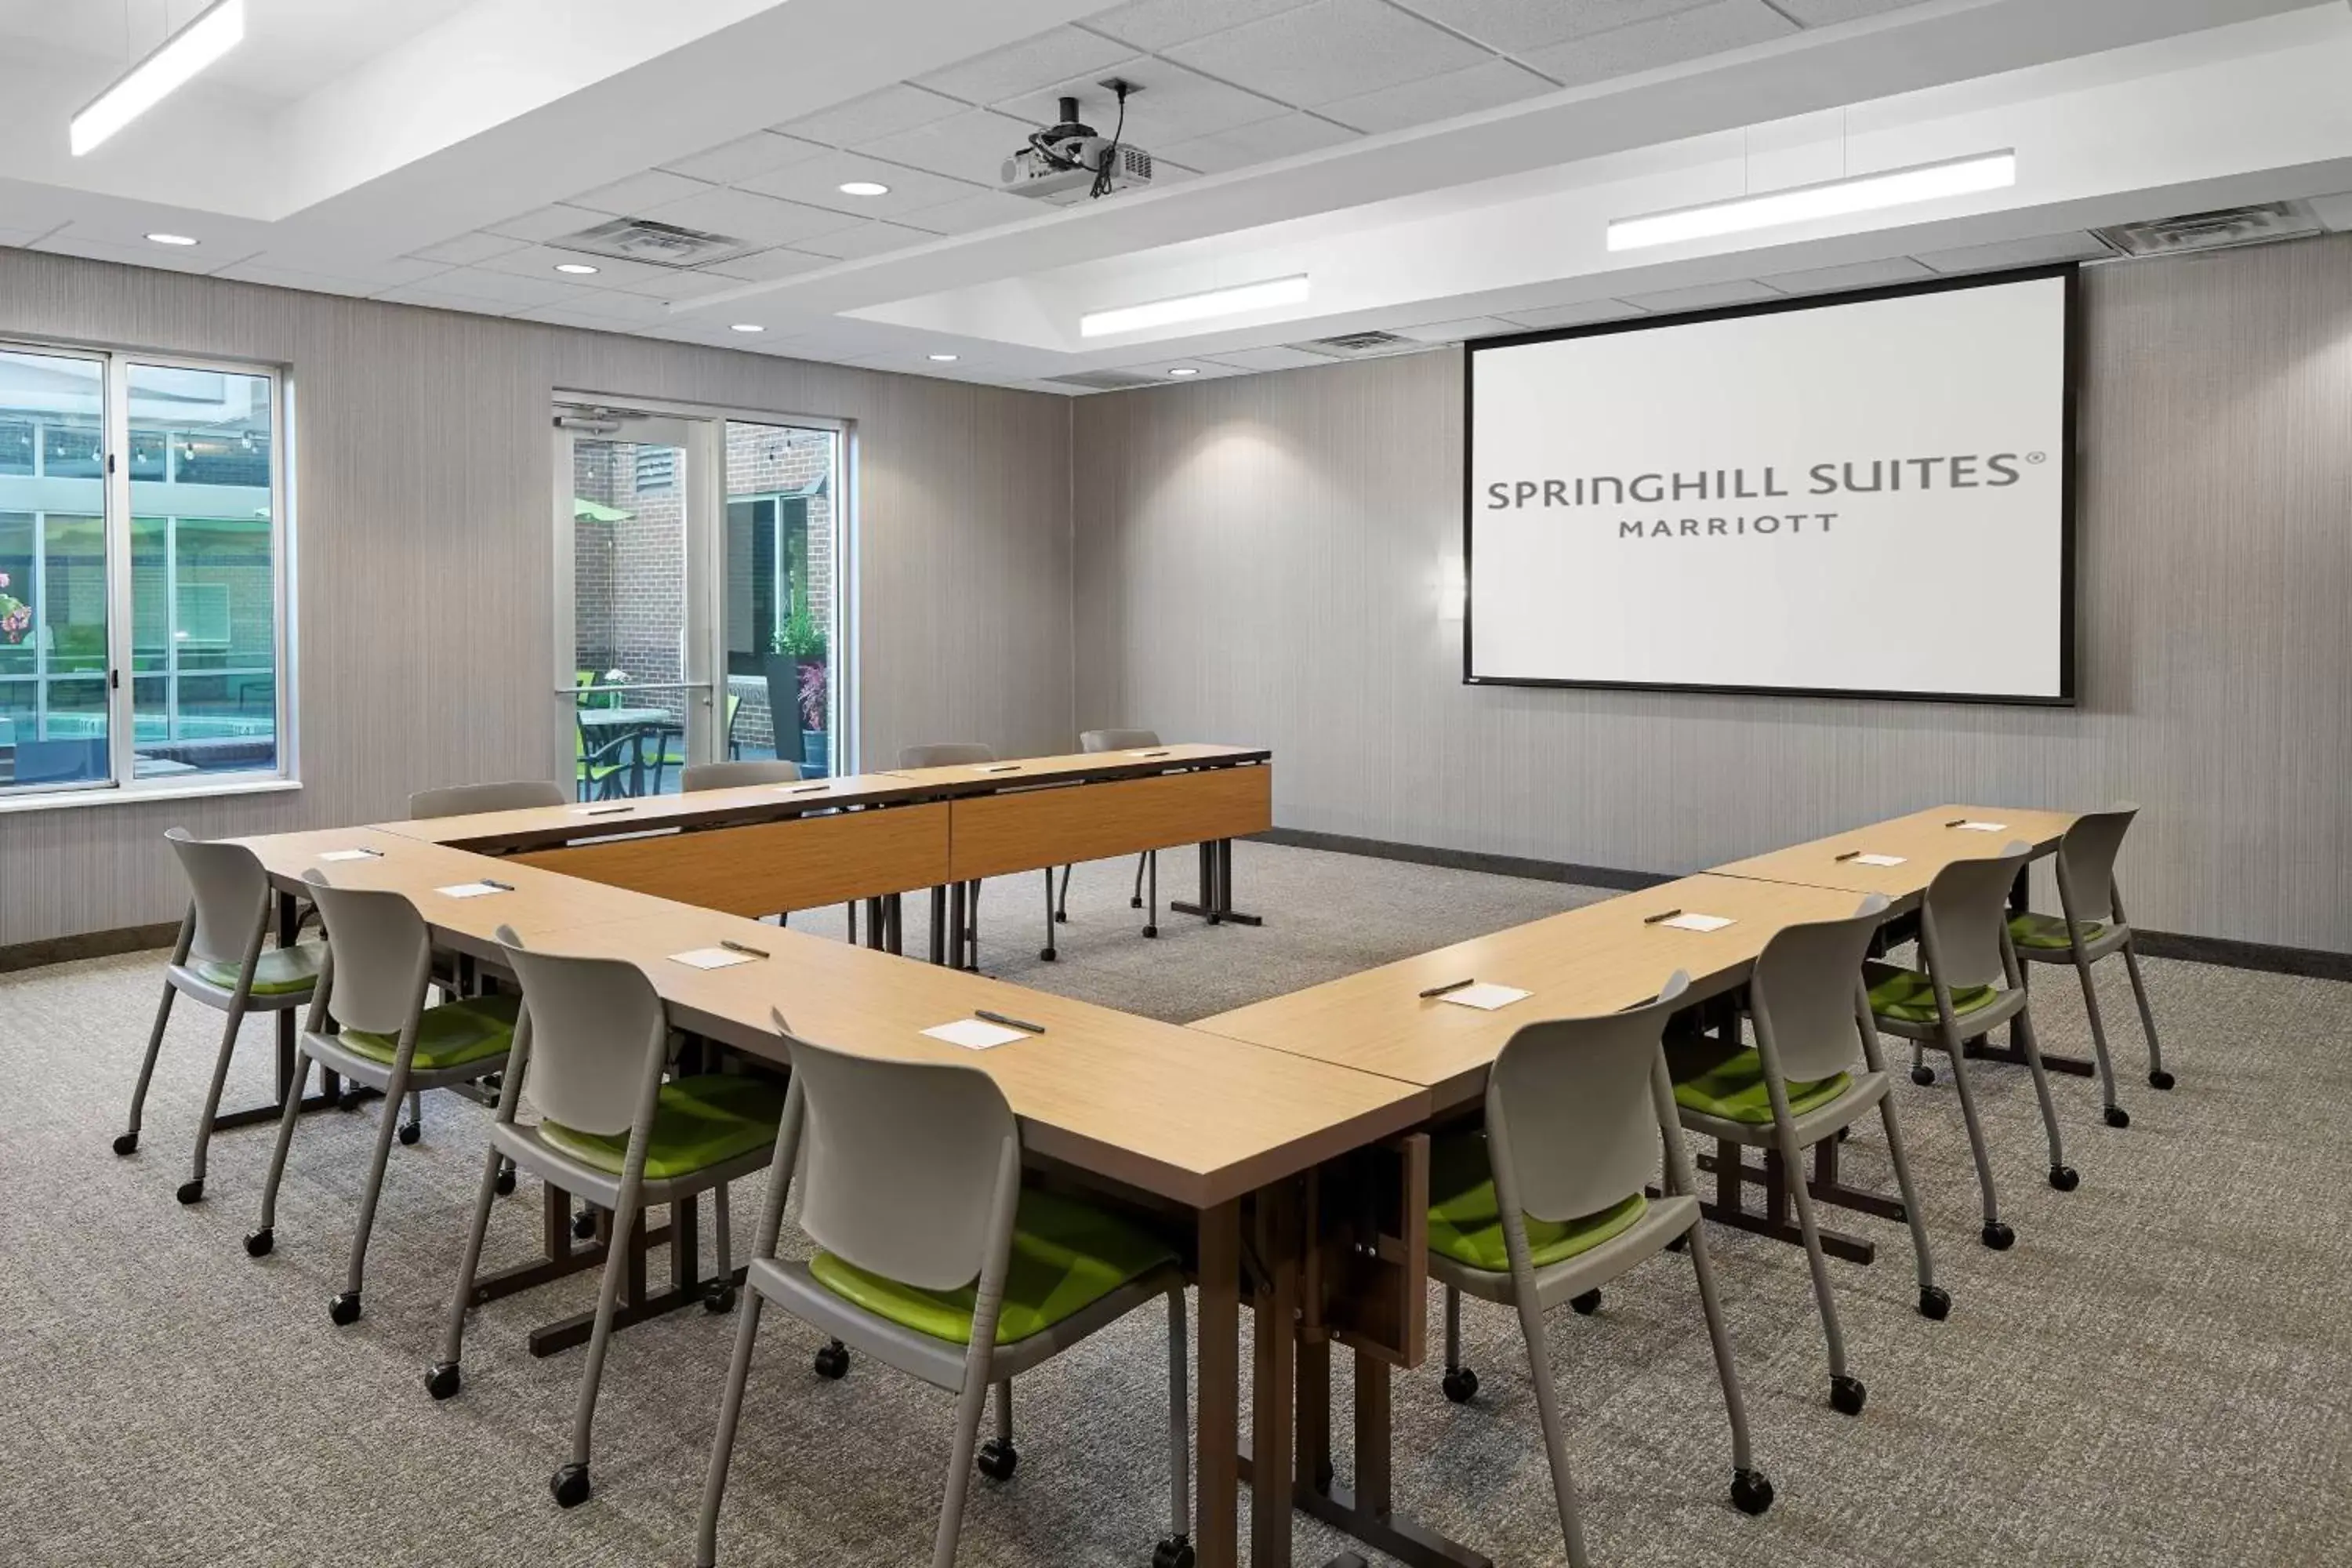 Meeting/conference room in SpringHill Suites by Marriott Roanoke